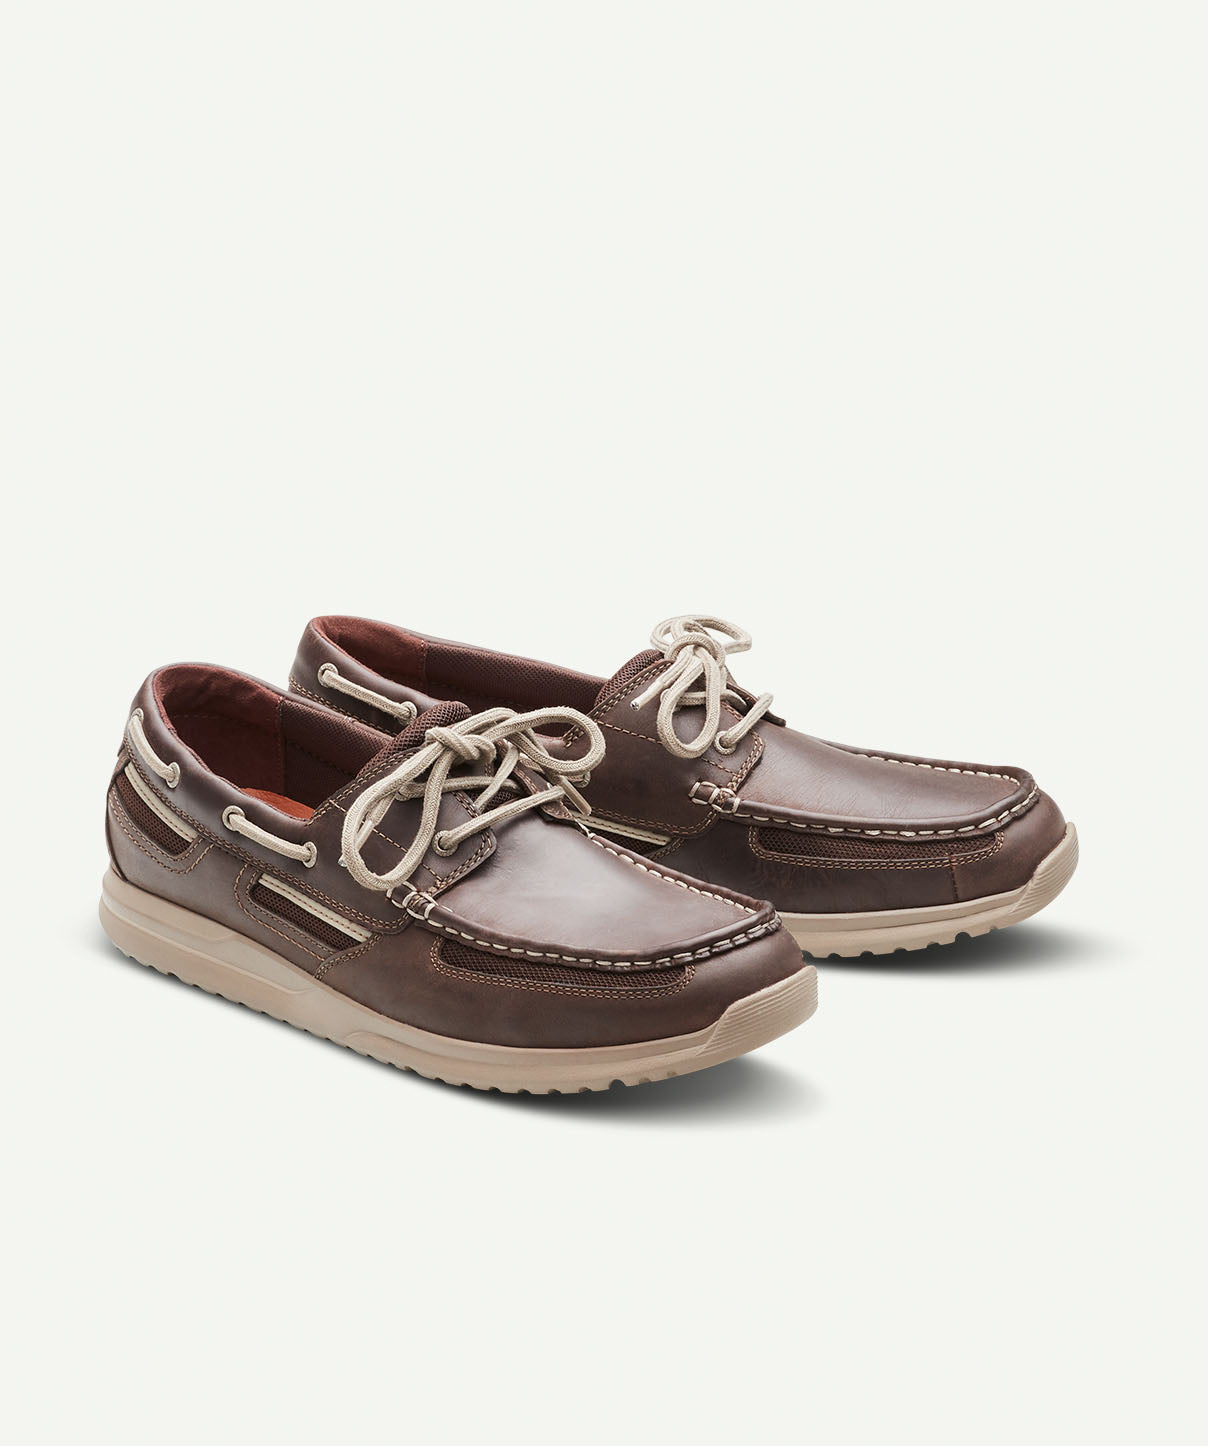 Rockport Boat Shoes - Ox Brown | Shoes 